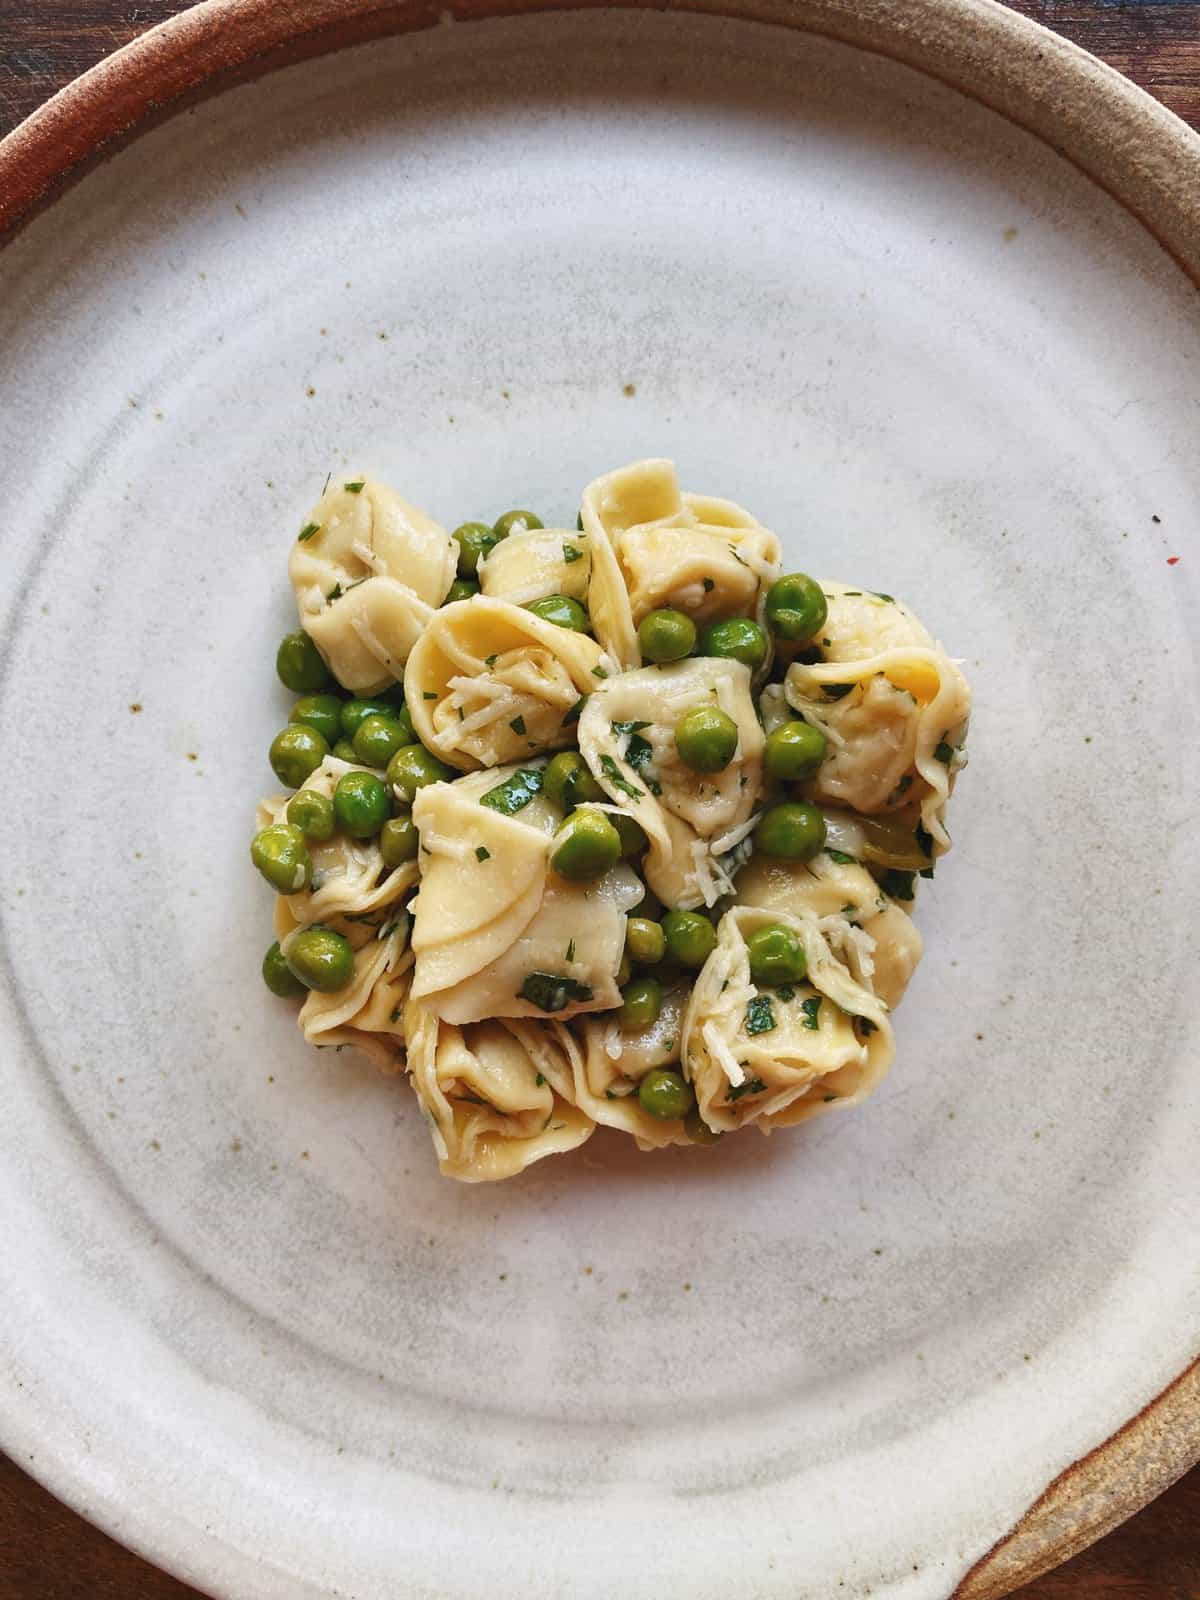 Overhead view of tortellini and green pea salad placed on a plate.